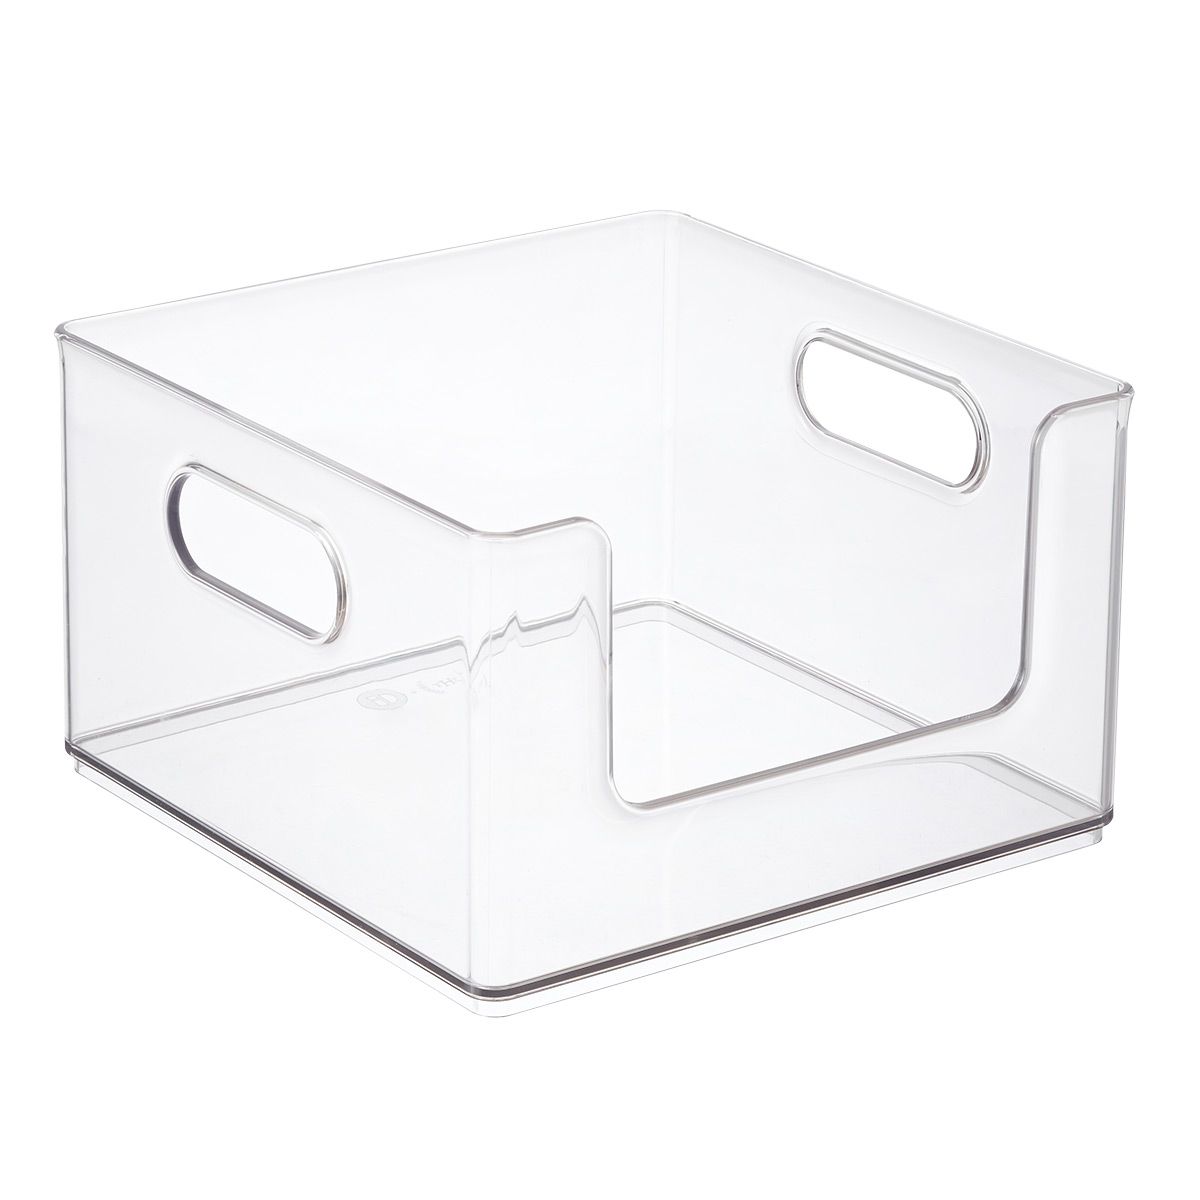 Case of 4 | The Container Store